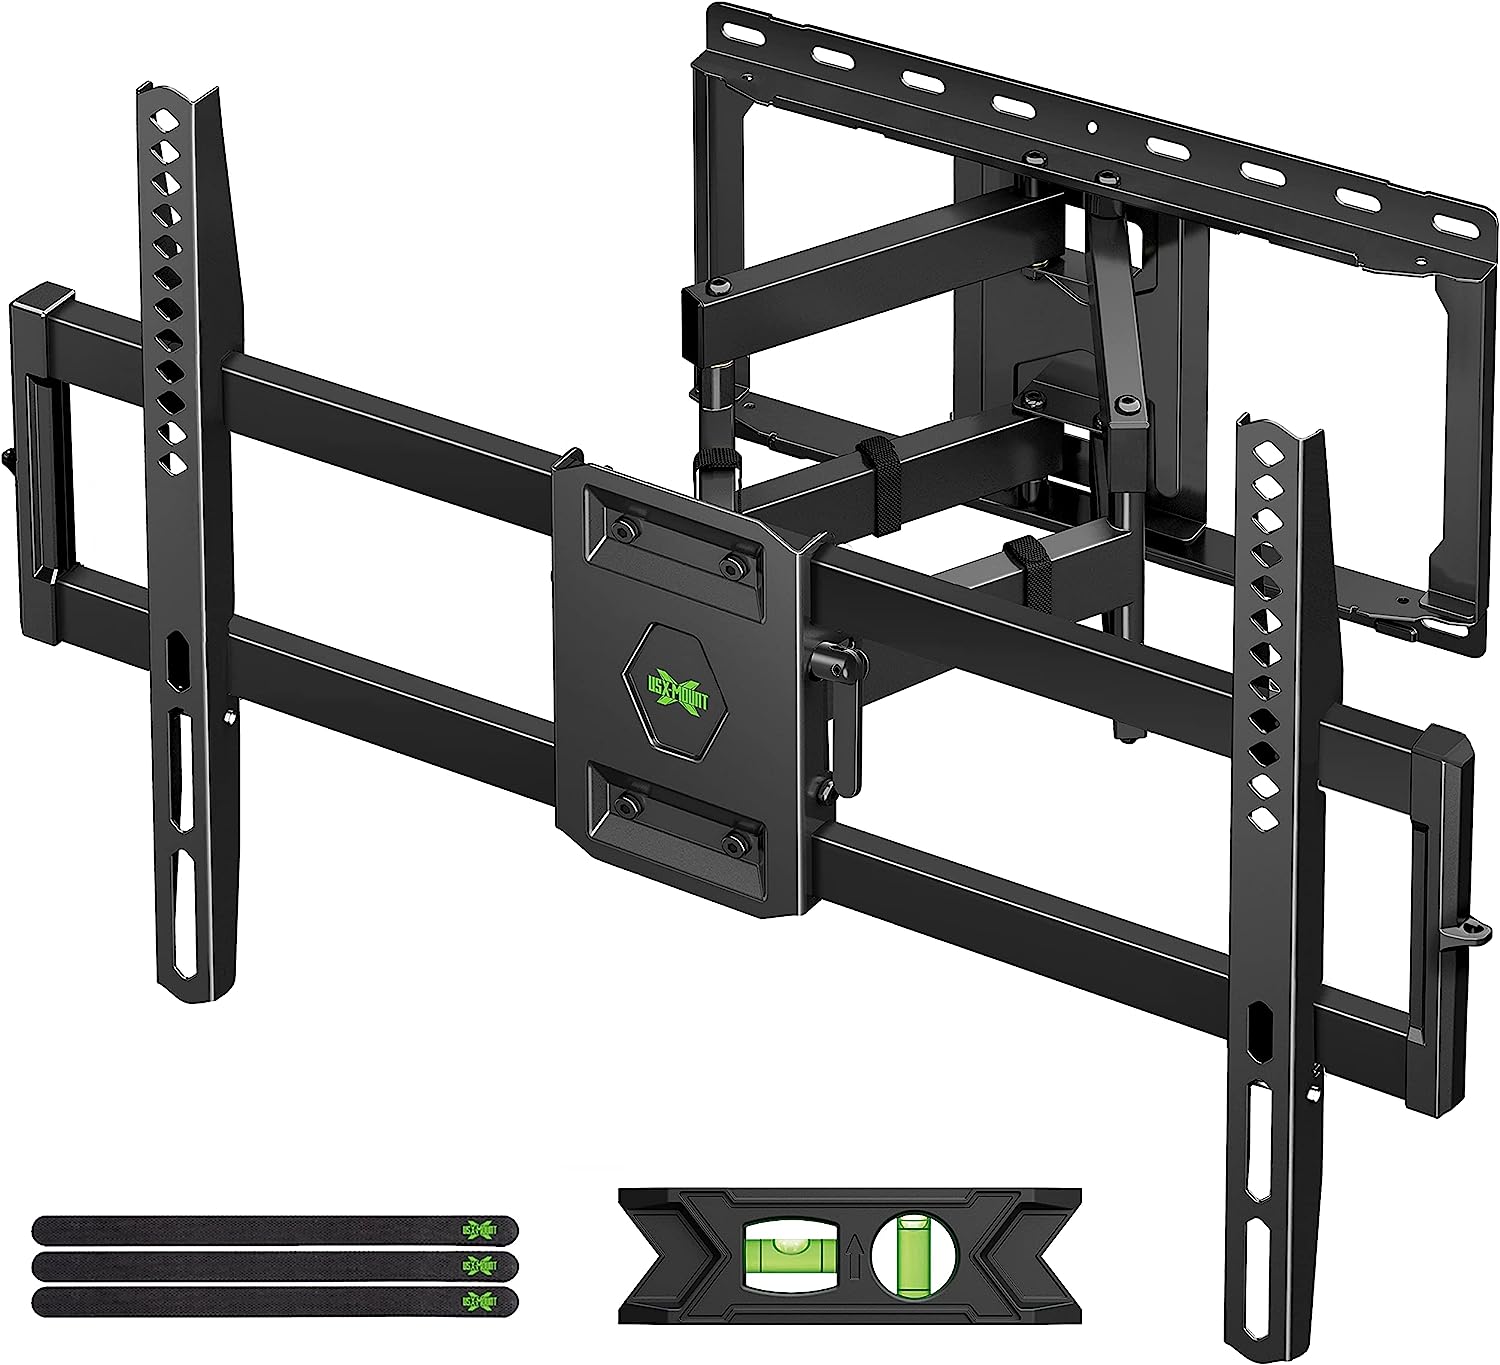 USX MOUNT Full Motion TV Wall Mount for Most 47-84 [...]